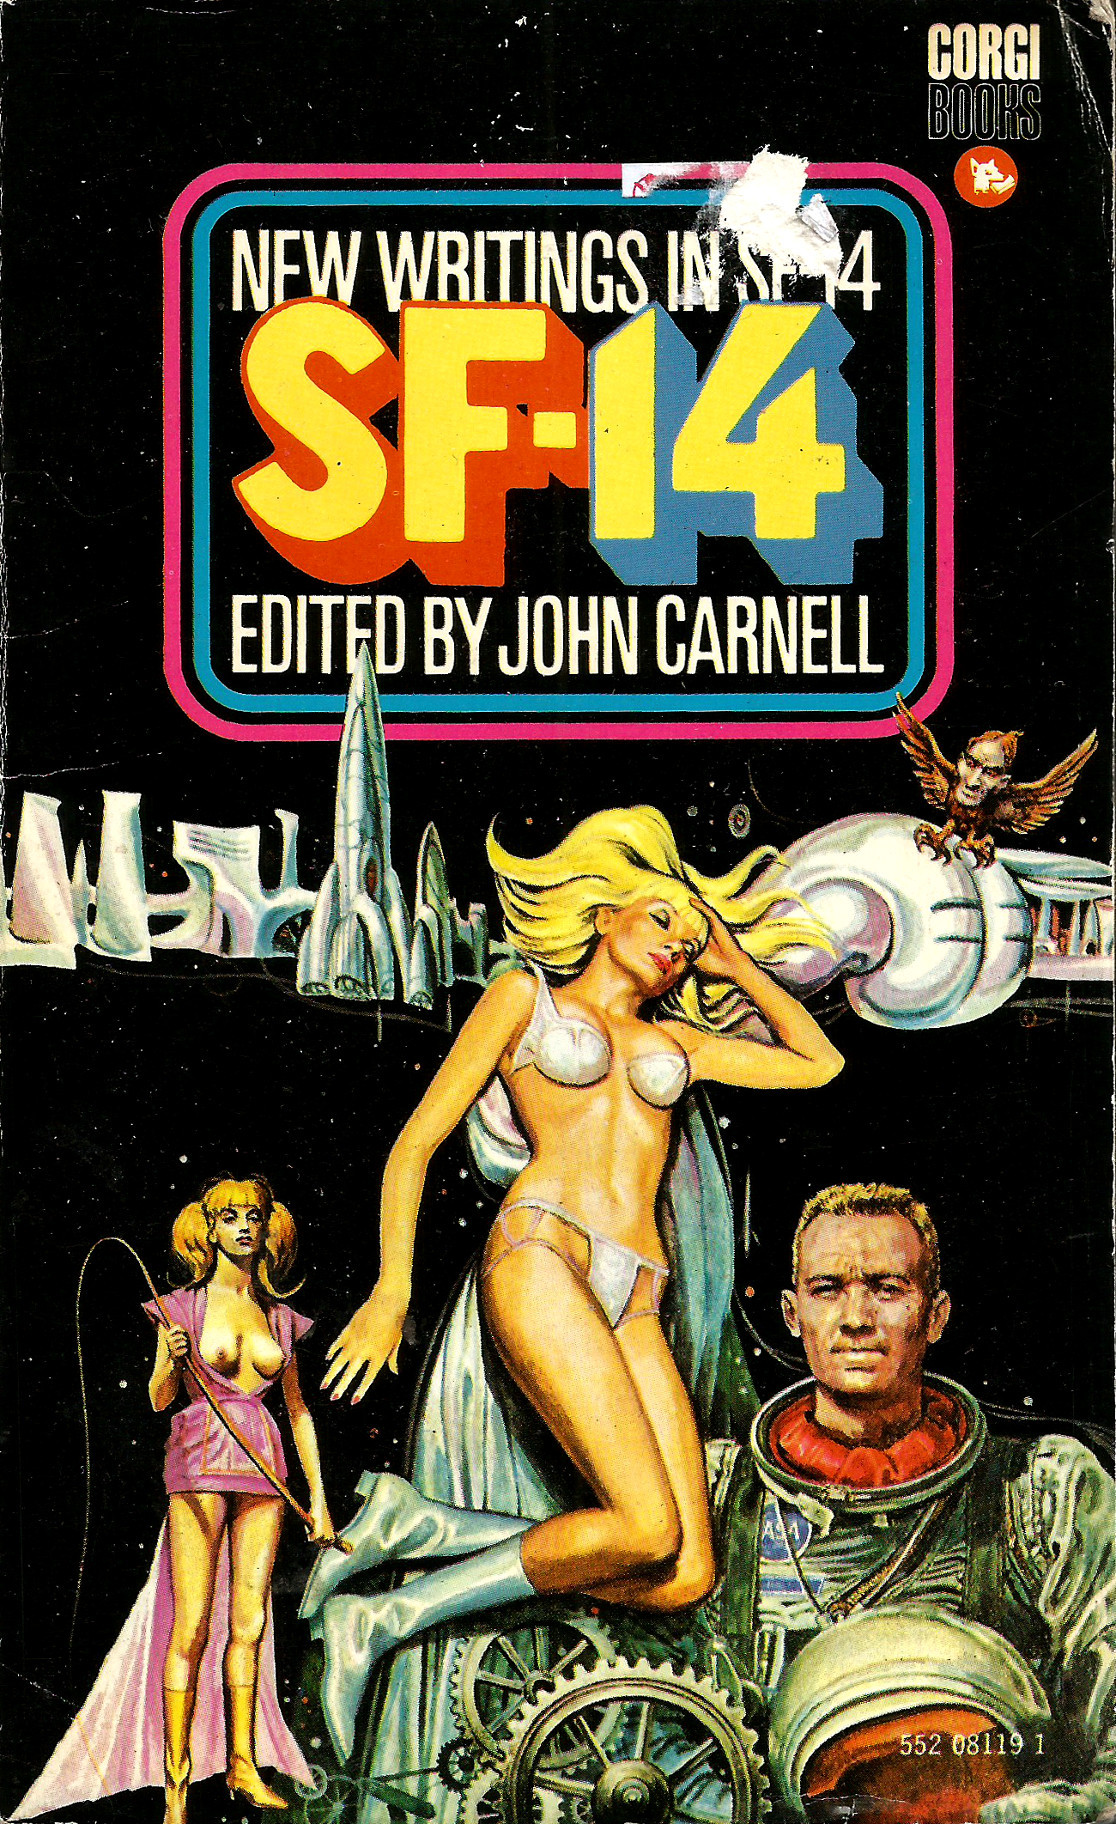 New Writings in SF-14, edited by John Carnell. (Corgi Books, 1969).From a charity